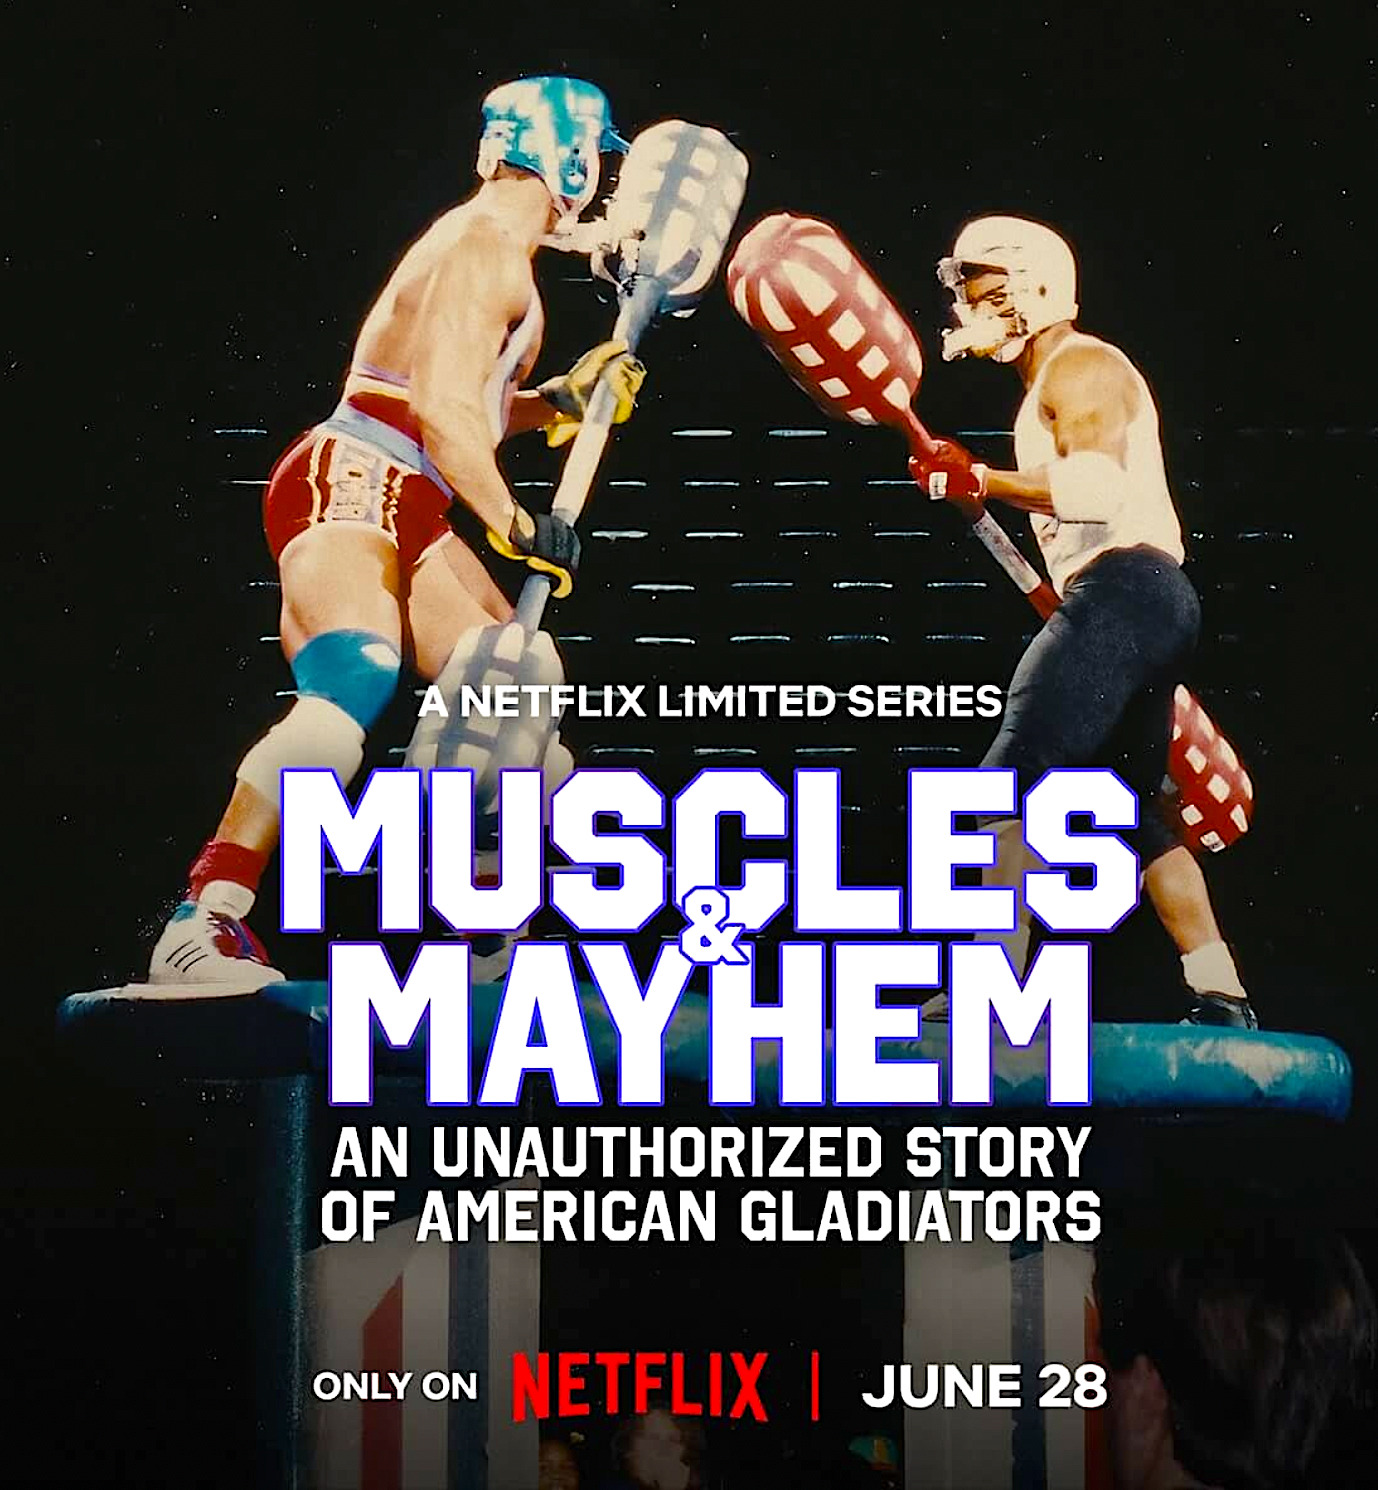 Extra Large TV Poster Image for Muscles & Mayhem: An Unauthorized Story of American Gladiators 